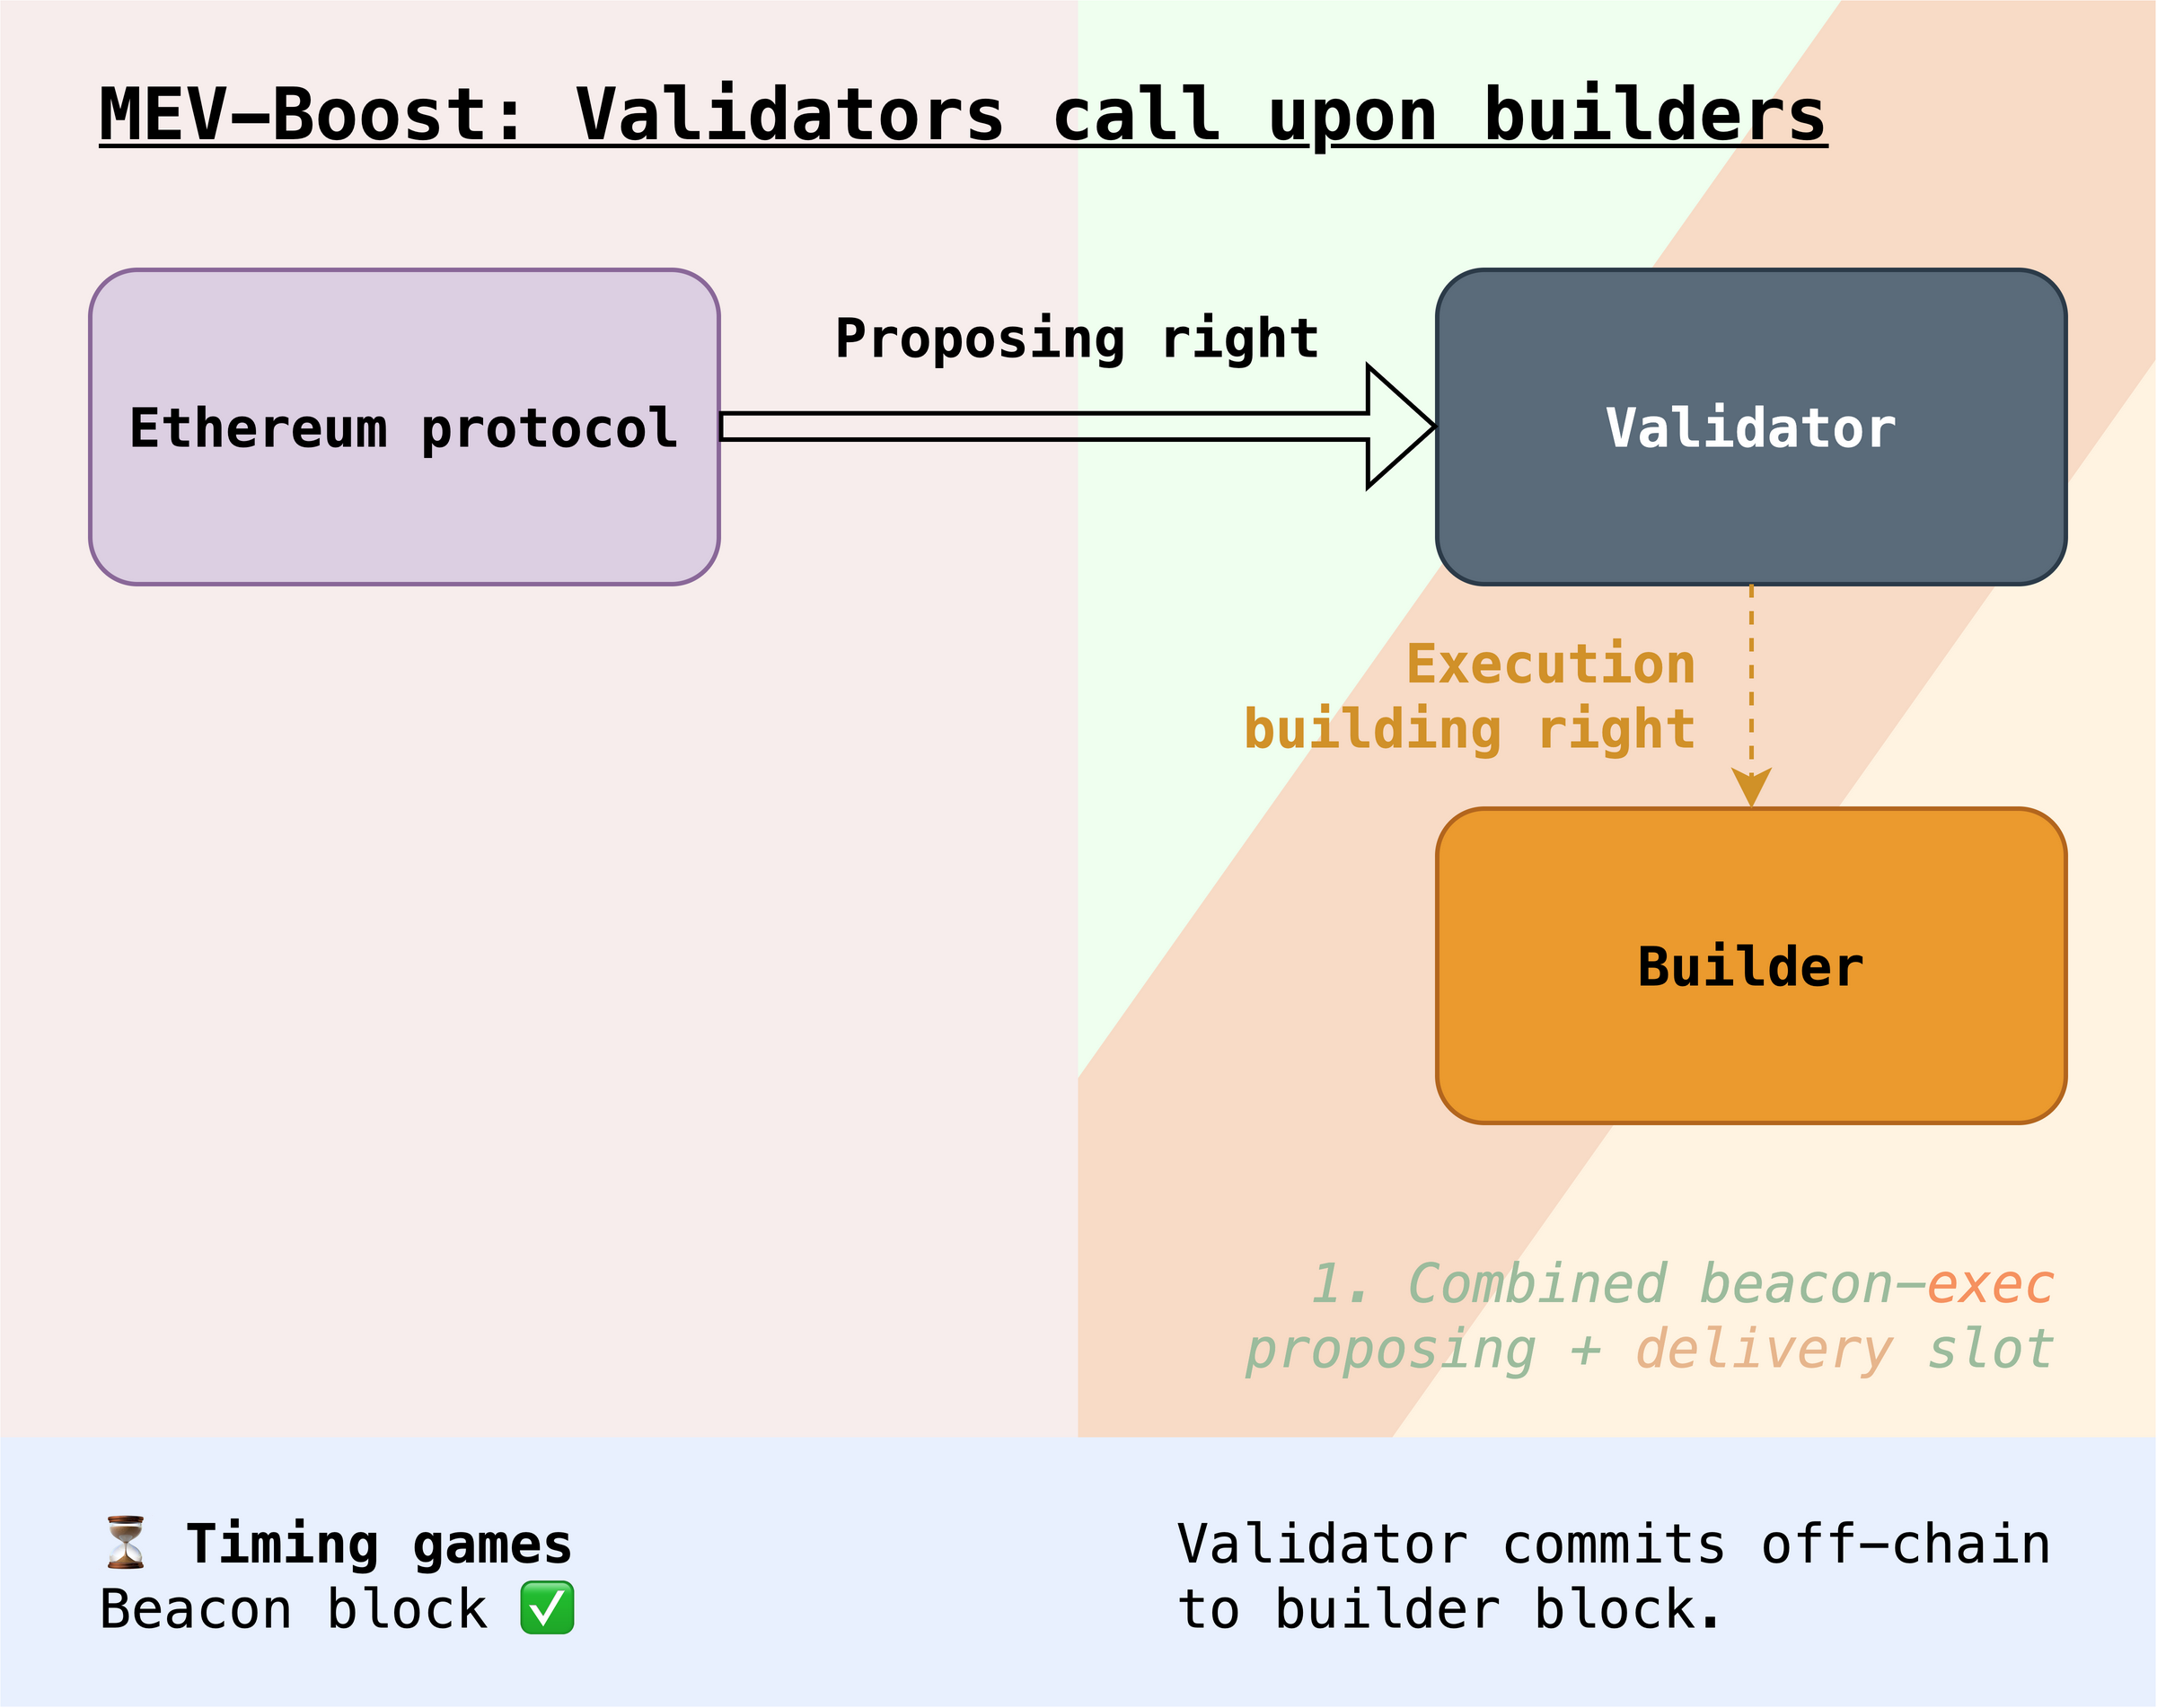 Dashed arrow indicates that the validator can choose to allocate building rights to a builder, but is not required to do so.